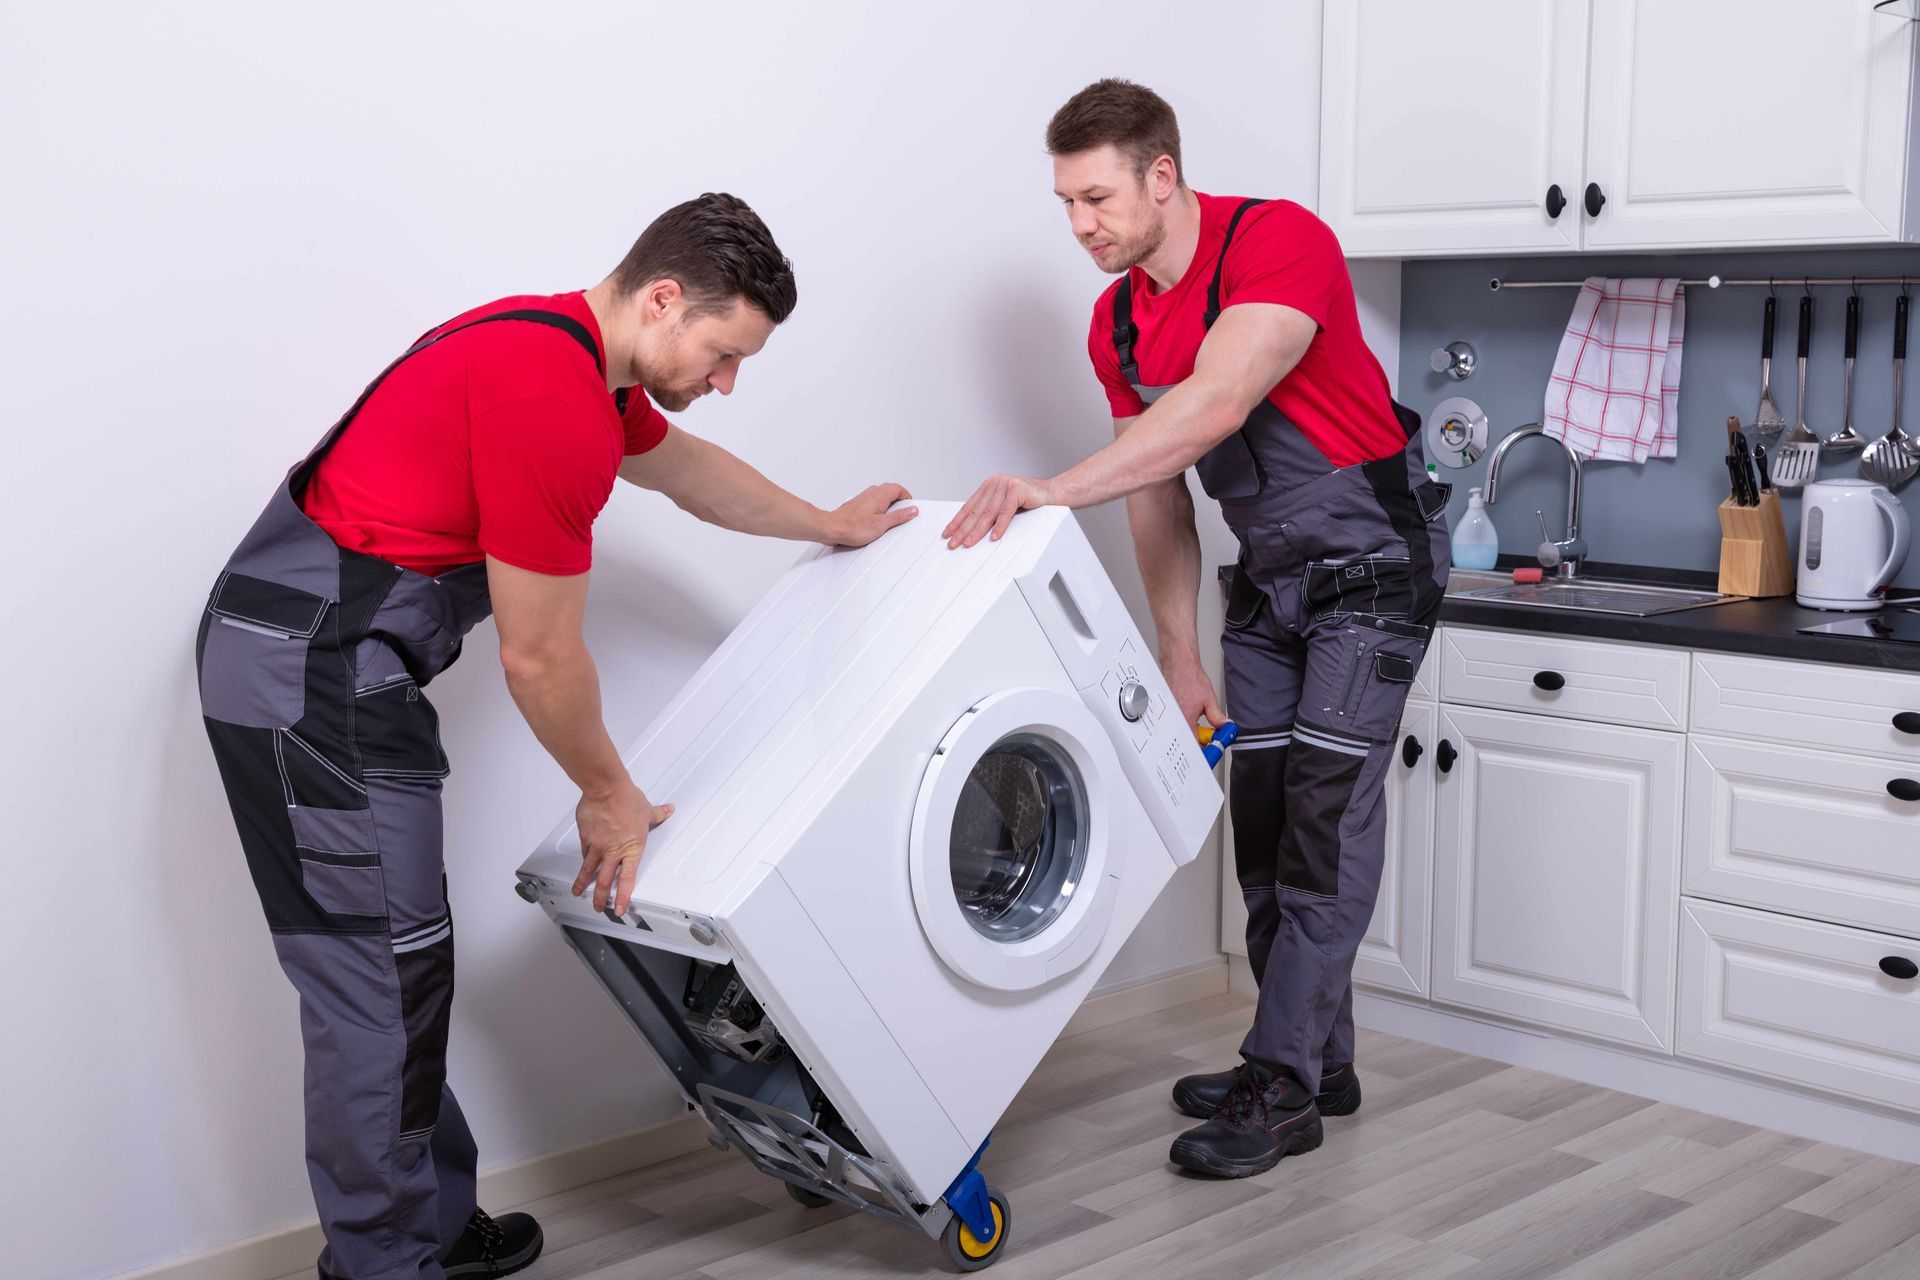 two men are carrying a washing machine on a dolly in a kitchen .